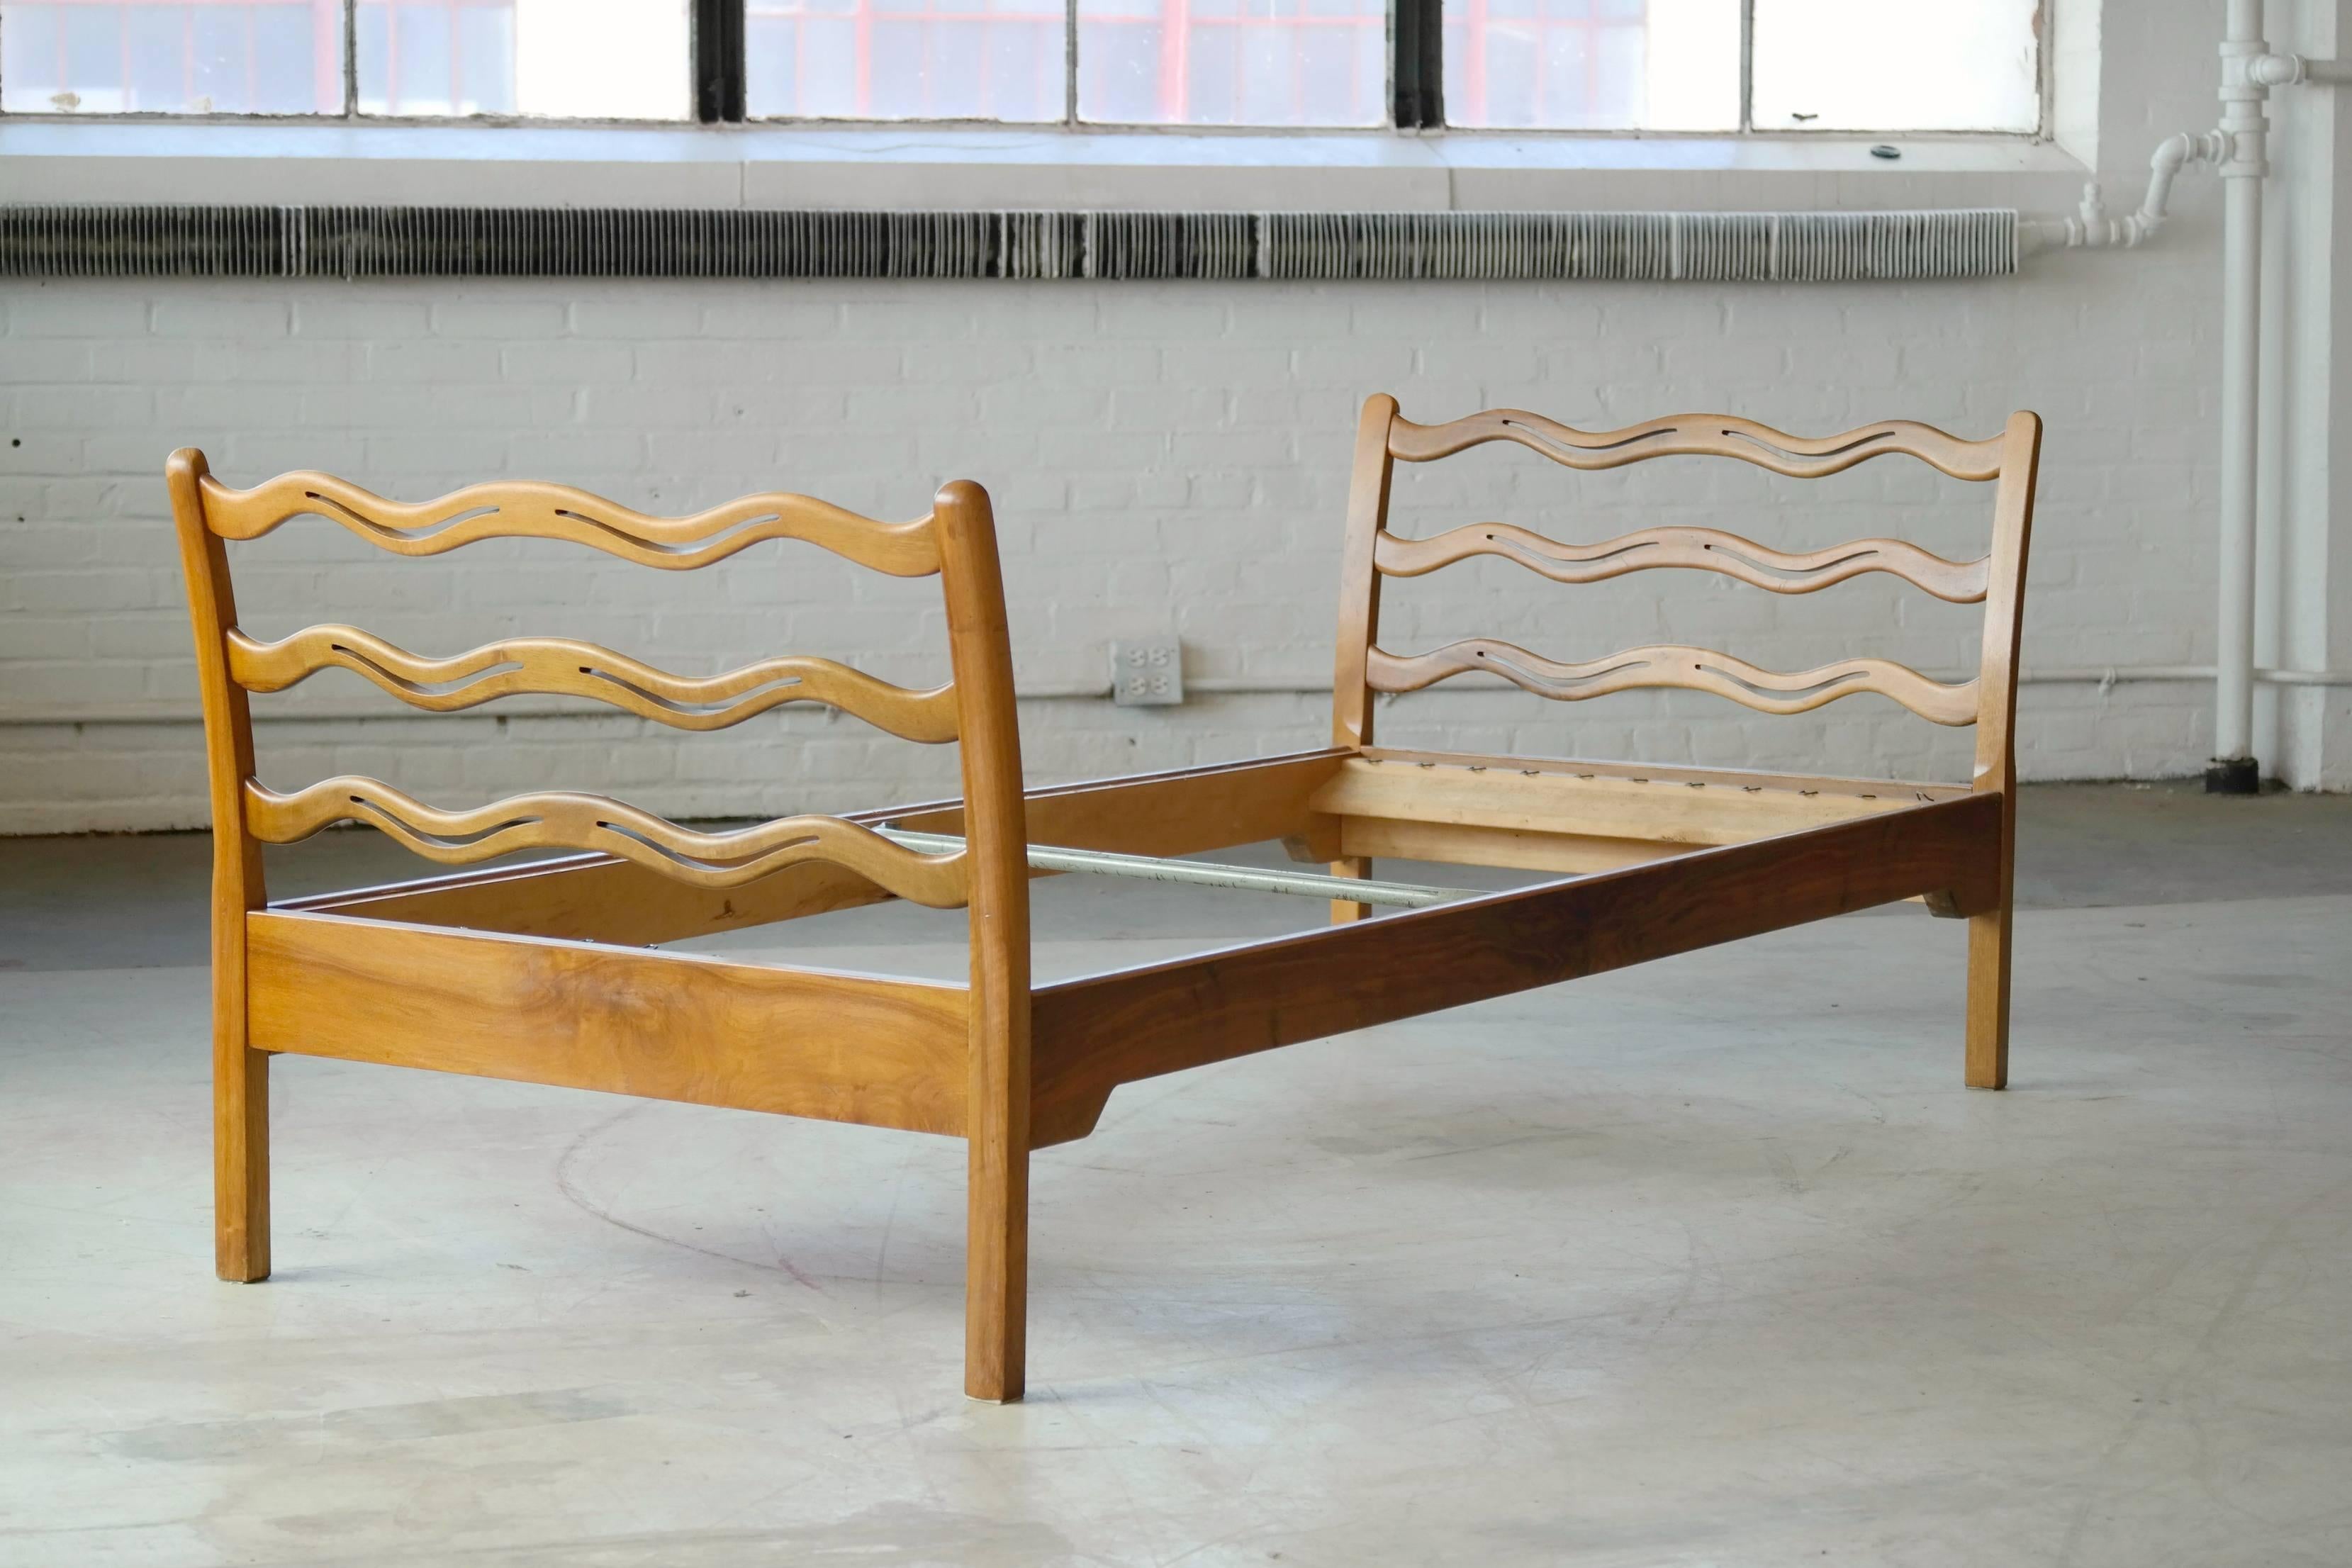 Fantastic Danish early Mid-century guest bed designed by Ole Wanscher for Fritz Hansen, circa 1945 in stained beech. This elegantly designed bed is rarely seen in the market and the last sale we have noted in the US was in 2010. Stamped 'FH"